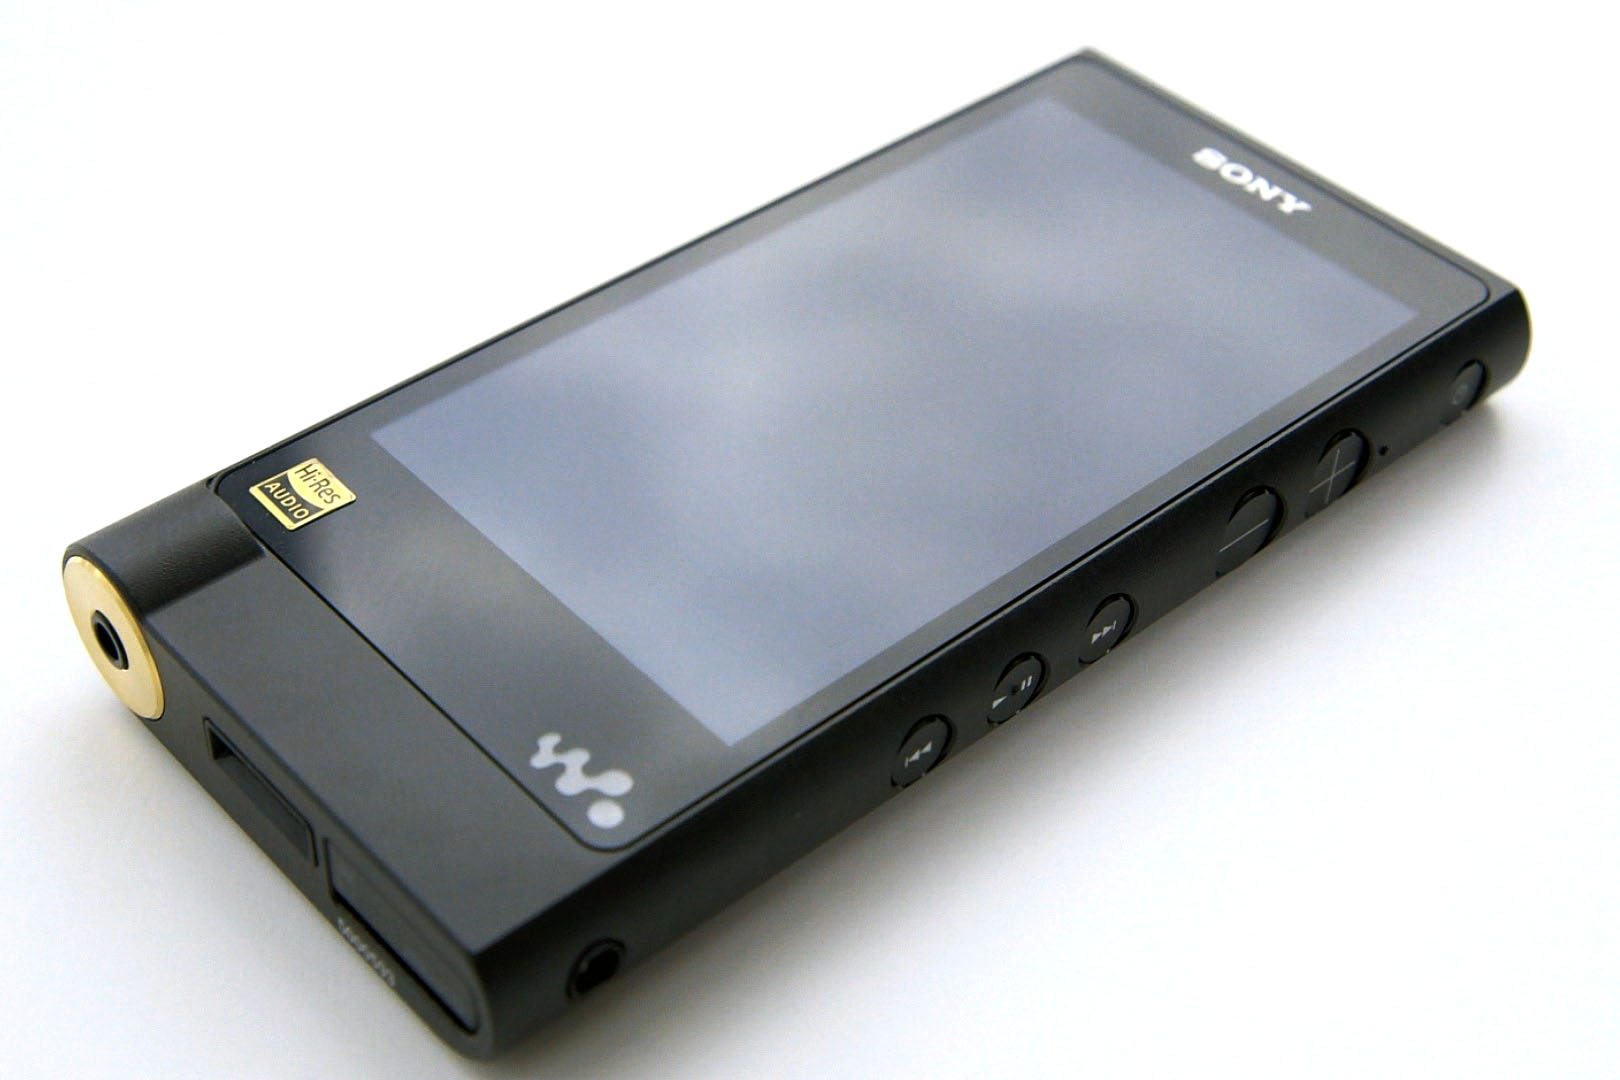 Sony Walkman ZX2 Review: Don't Spend $1,200 on a Portable Music